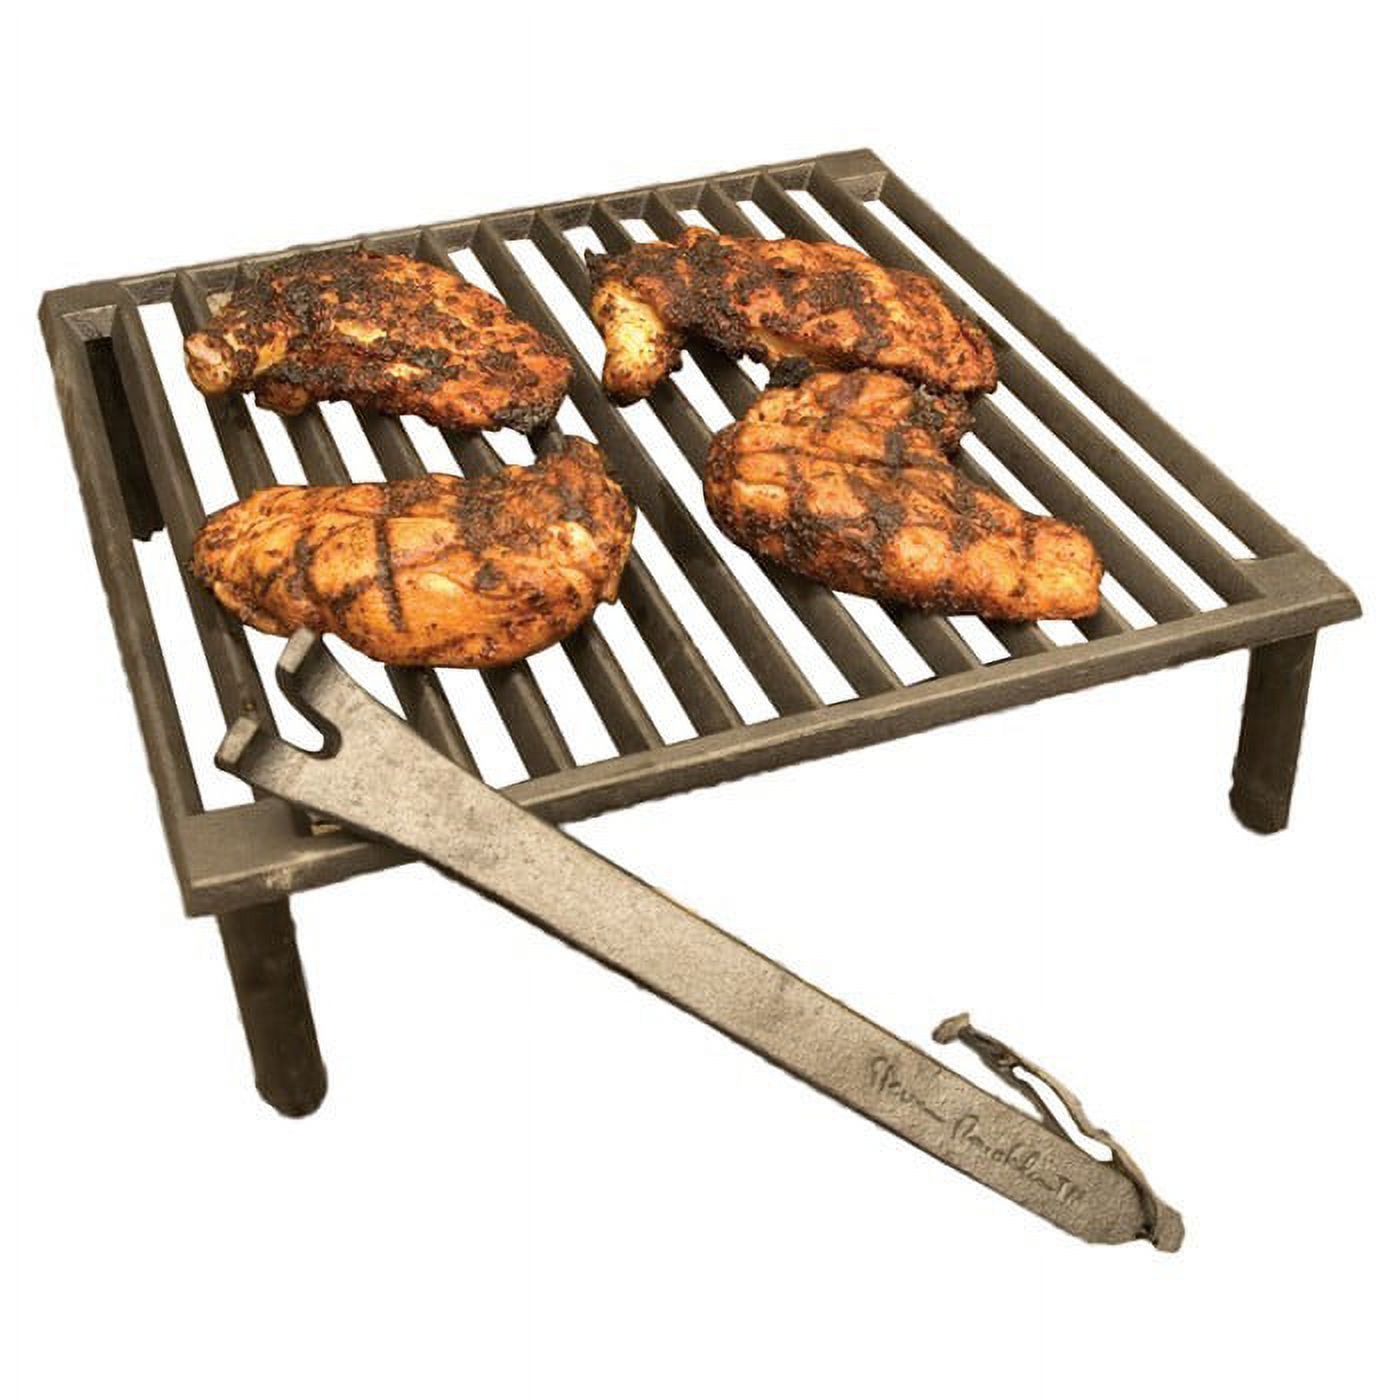 Steven Raichlen Best of Barbecue Cast Iron Tuscan BBQ Grill, 14” x 14” - image 3 of 4